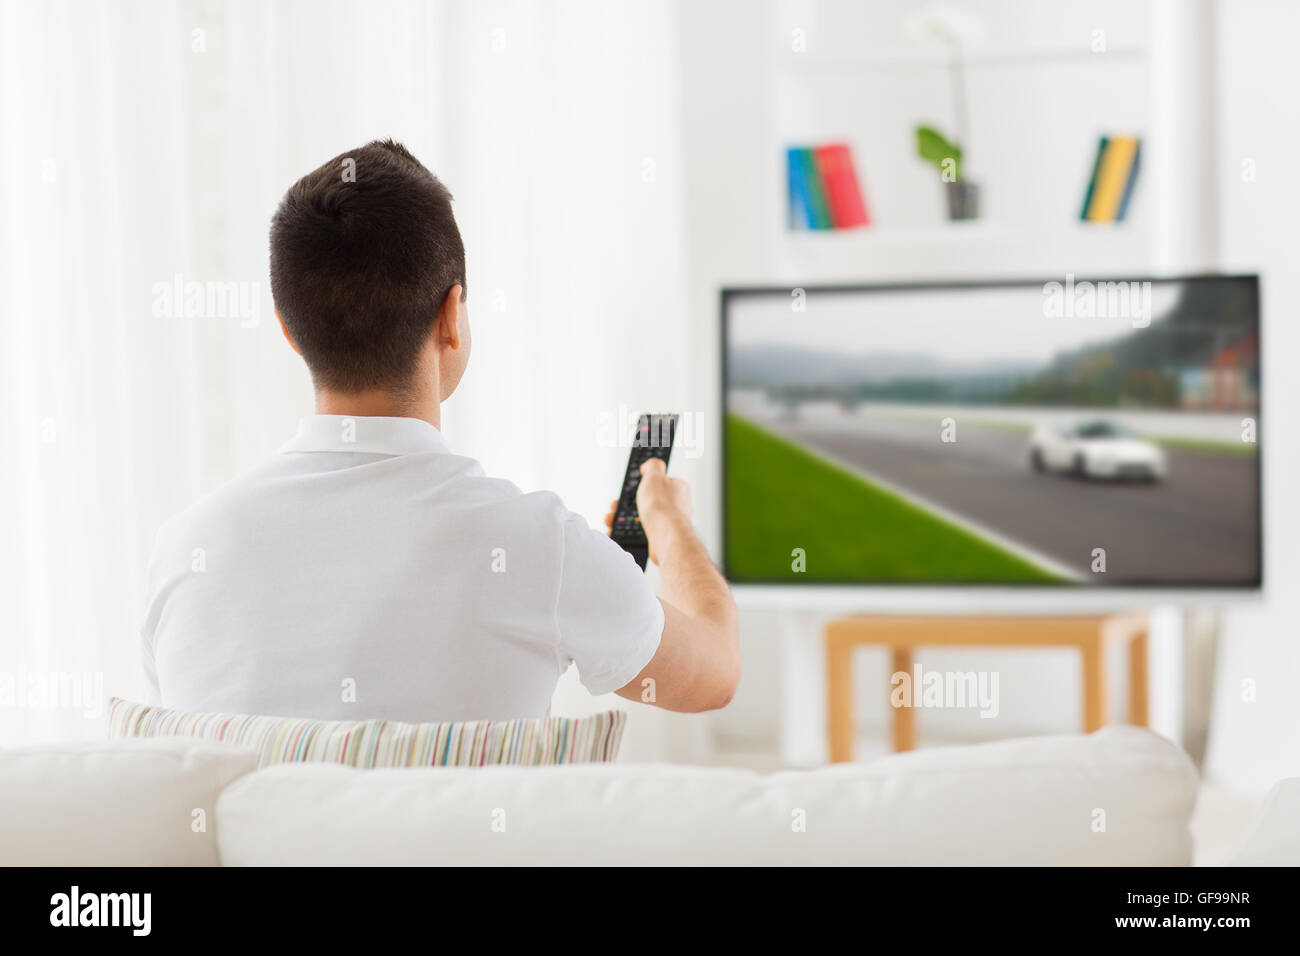 man with remote watching motorsports on tv at home Stock Photo